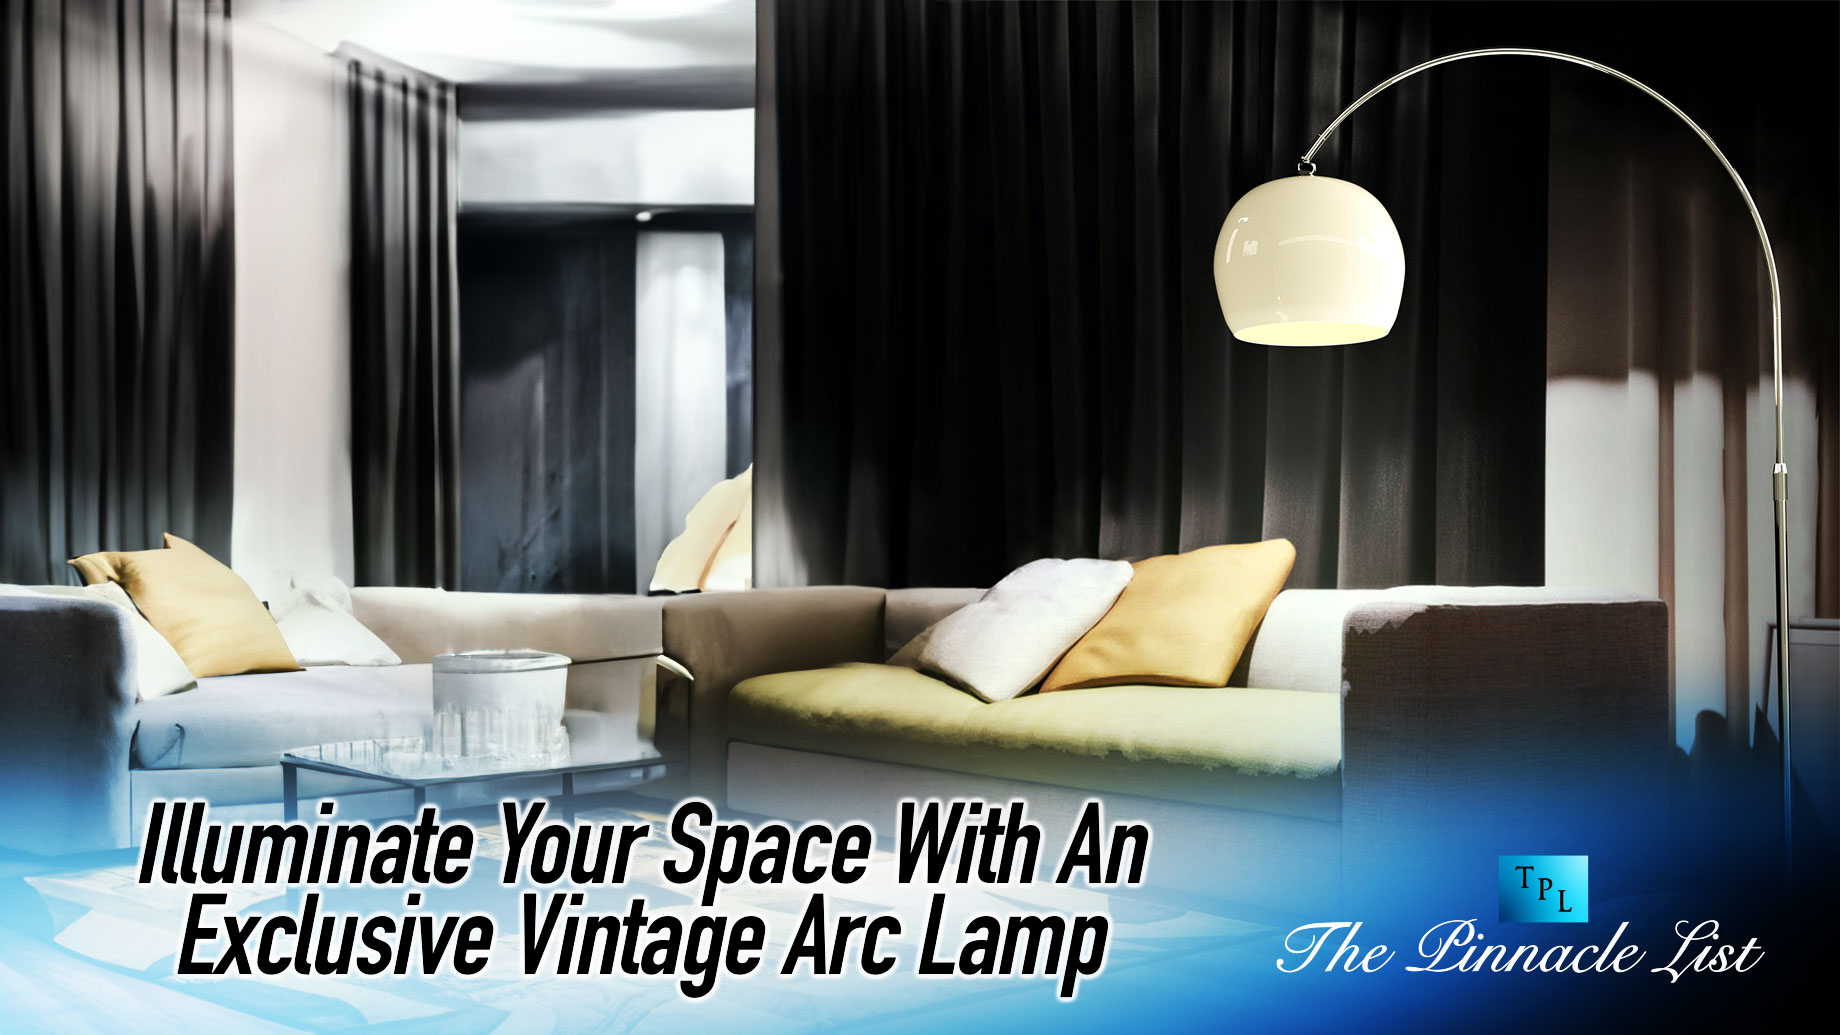 Illuminate Your Space With An Exclusive Vintage Arc Lamp